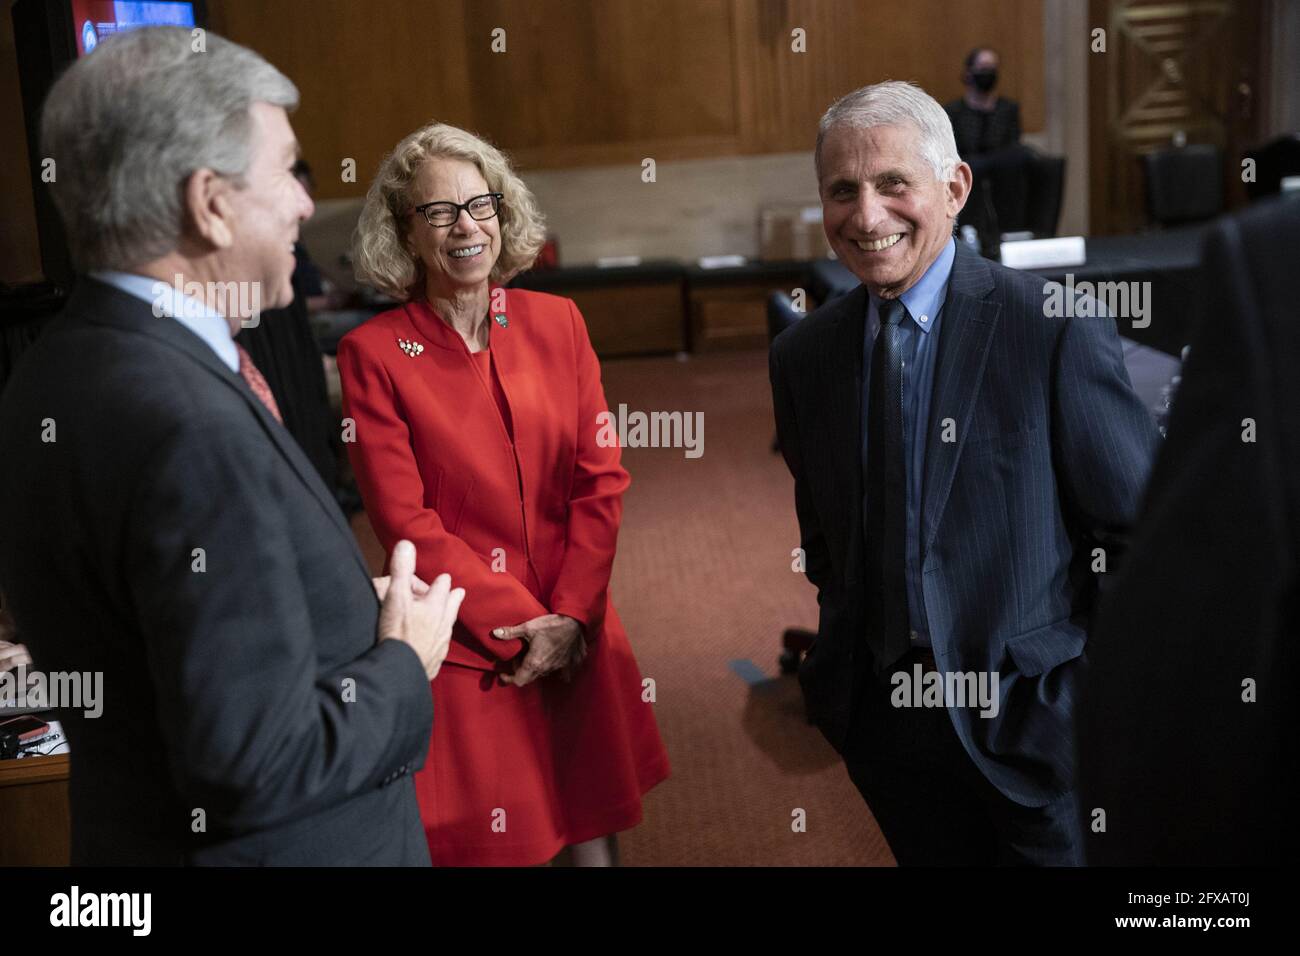 Washington, United States. 26th May, 2021. From left: Senator Roy Blunt (R-MO), Dr. Diana Bianchi, director of the Eunice Kennedy Shriver National Institute of Child Health and Human Development, and Dr. Anthony Fauci, director of the National Institute of Allergy and Infectious Diseases, talk after a Senate Appropriations Labor, Health and Human Services Subcommittee hearing on Capitol Hill in Washington, DC on Wednesday, May 26, 2021. Photo by Sarah Silbiger/UPI Credit: UPI/Alamy Live News Stock Photo